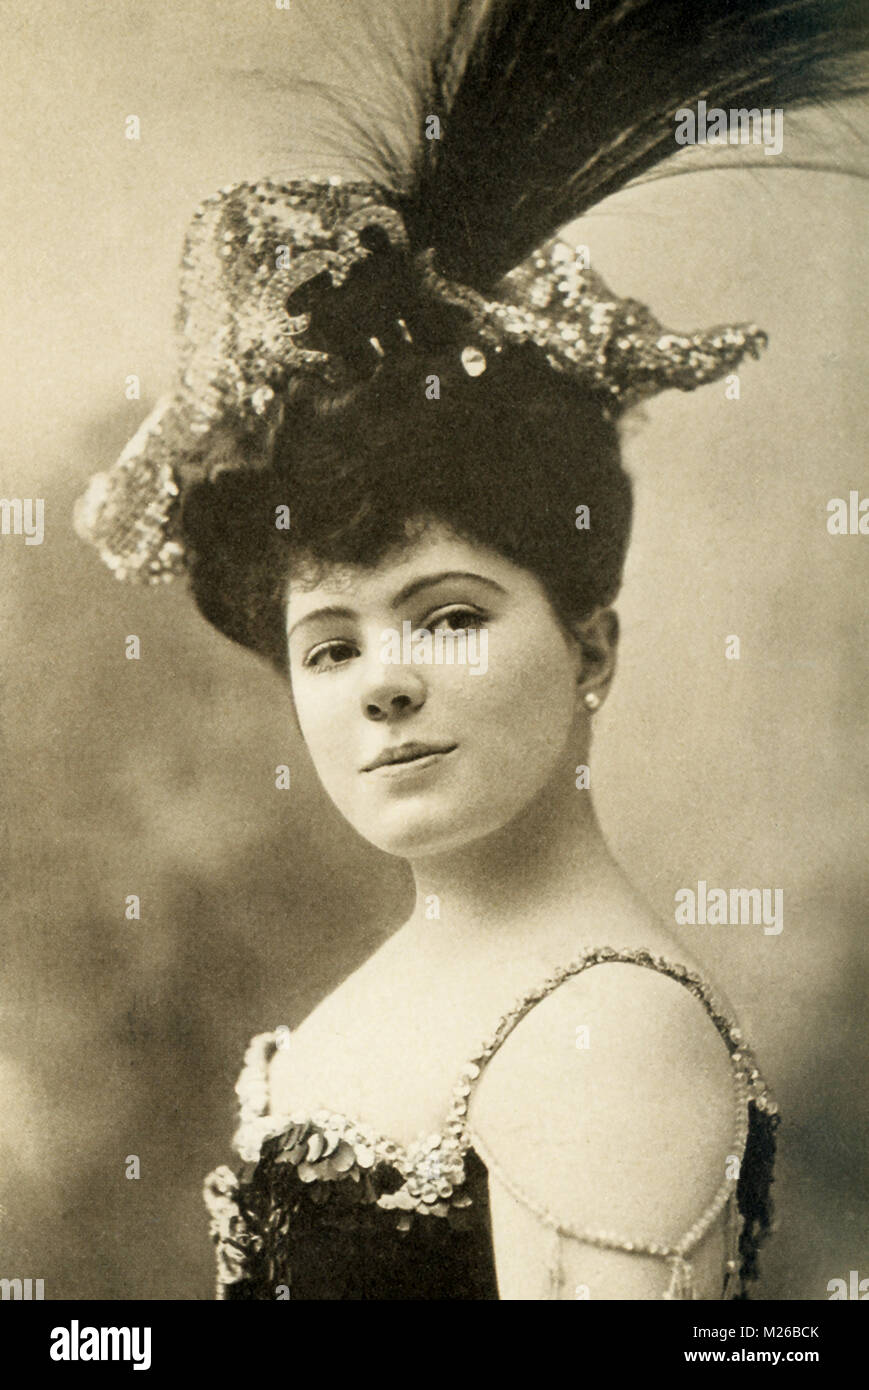 This photo, dating to around 1908, shows Madame Fritzi Scheff, one of the most popular light opera singers at the time. She was Viennese by birth, made her debut n Frankfort as Juliet. Sang in all the cities of Europe in grand opera. She came to the United States in 1900, appearing in Fidelio, La Boheme, and I Pagliacci. She was married to Baron von Bardeleben, a German Hussar. She was nicknamed Paderewski ('the little deviling of grand opera'). Stock Photo